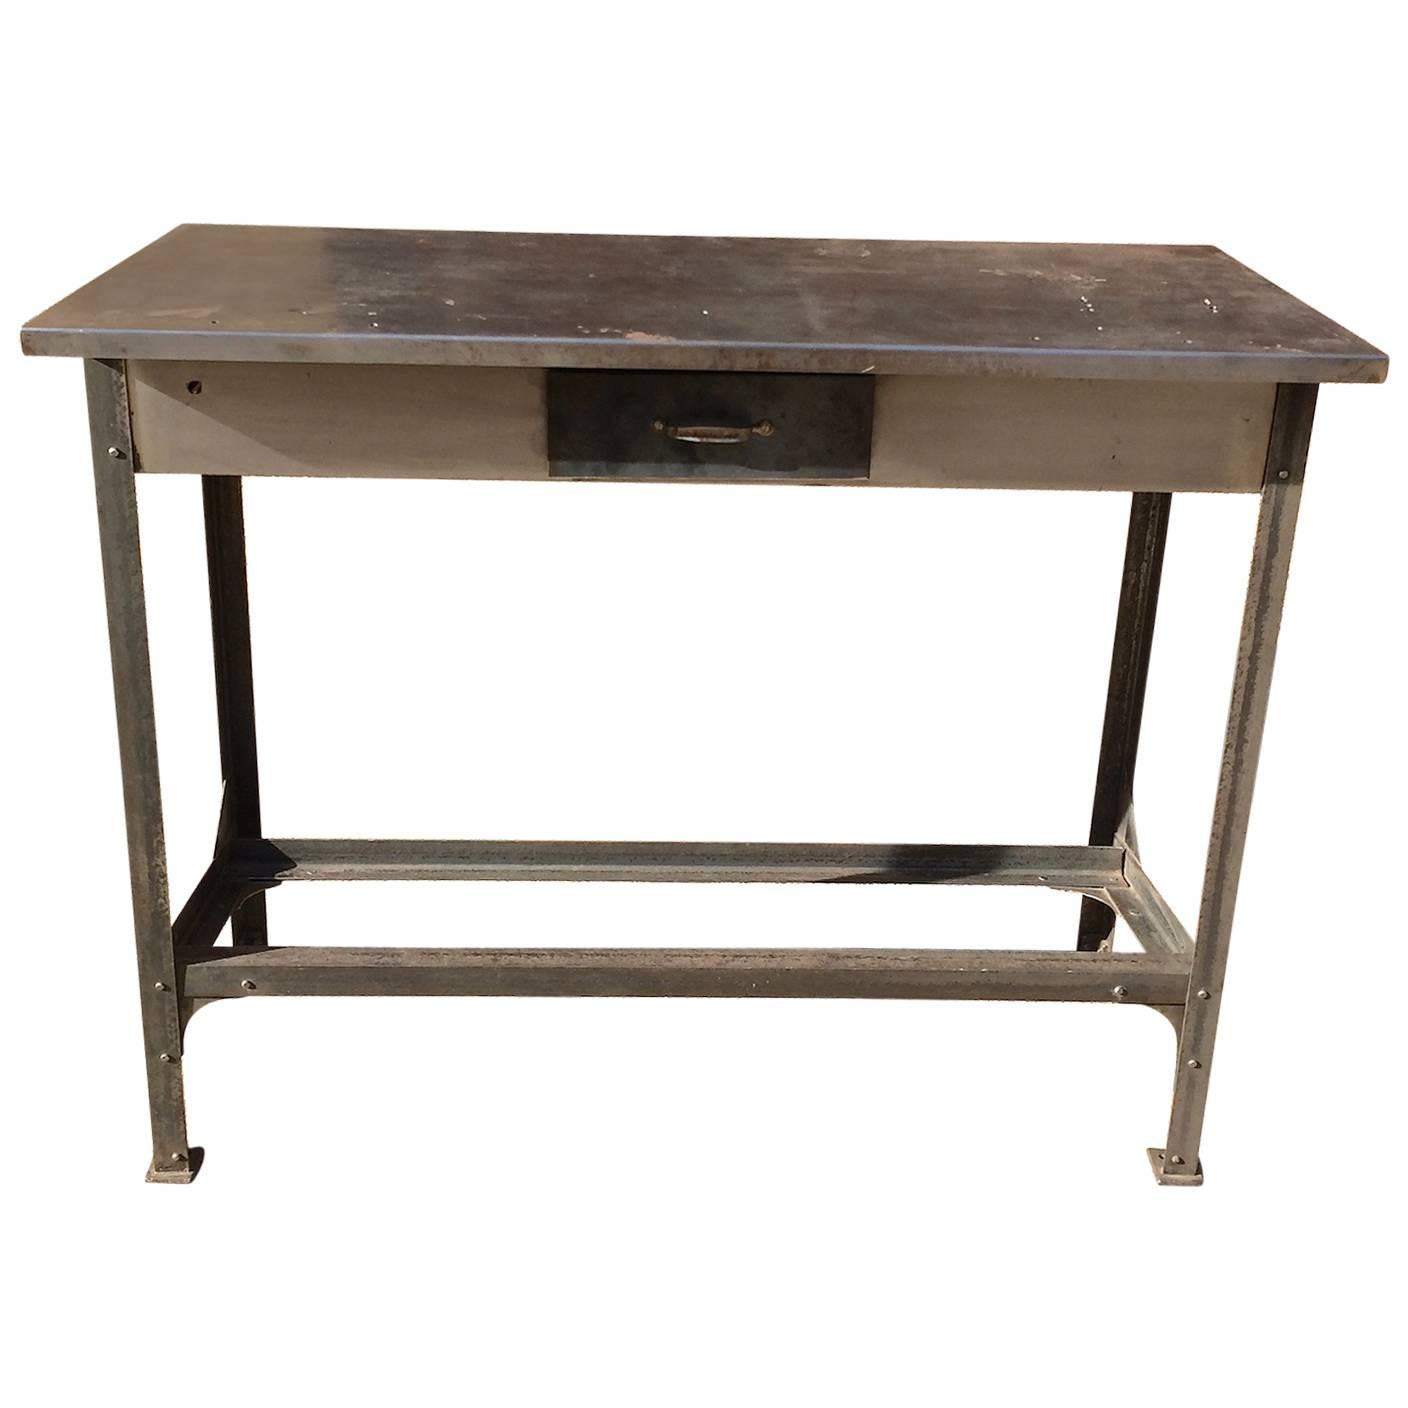 Industrial Brushed Steel Work Bench Table